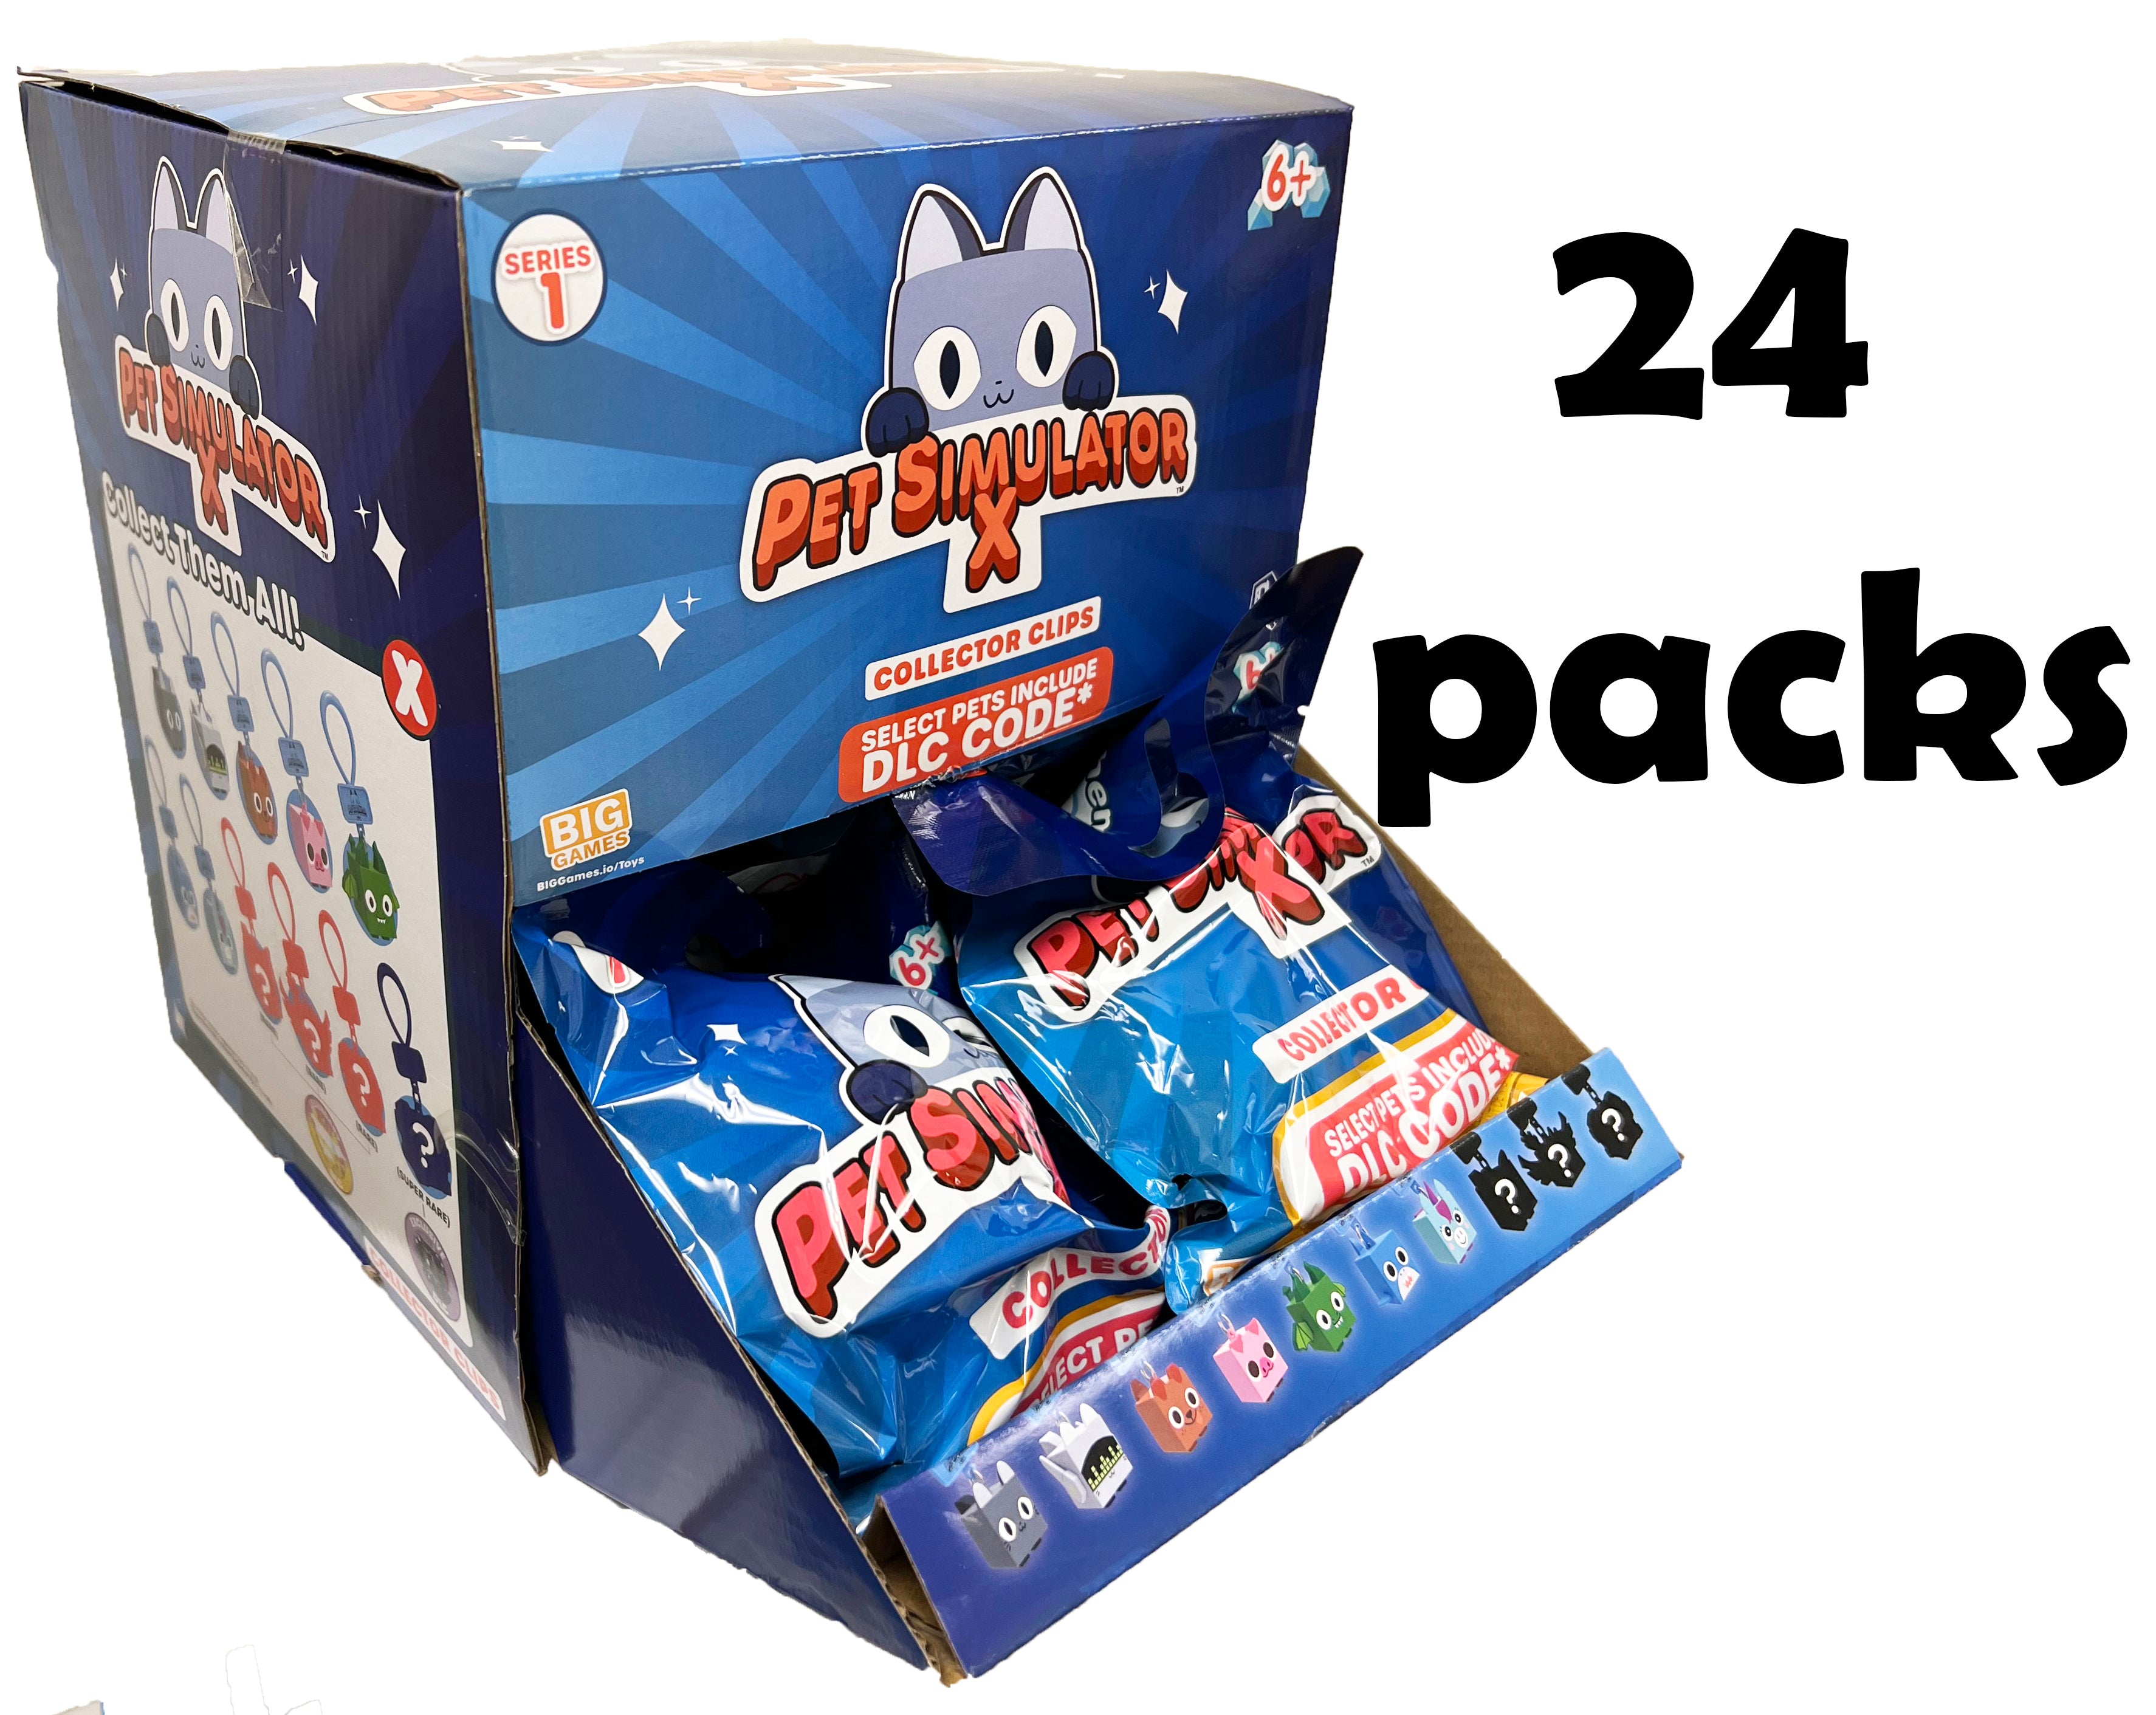  PET Simulator X - Mystery Pet Minifigure Toys with Collector  Clip - Blind Bags 24 Pack Box and Chance of DLC Code - Surprise Collectable  : Toys & Games